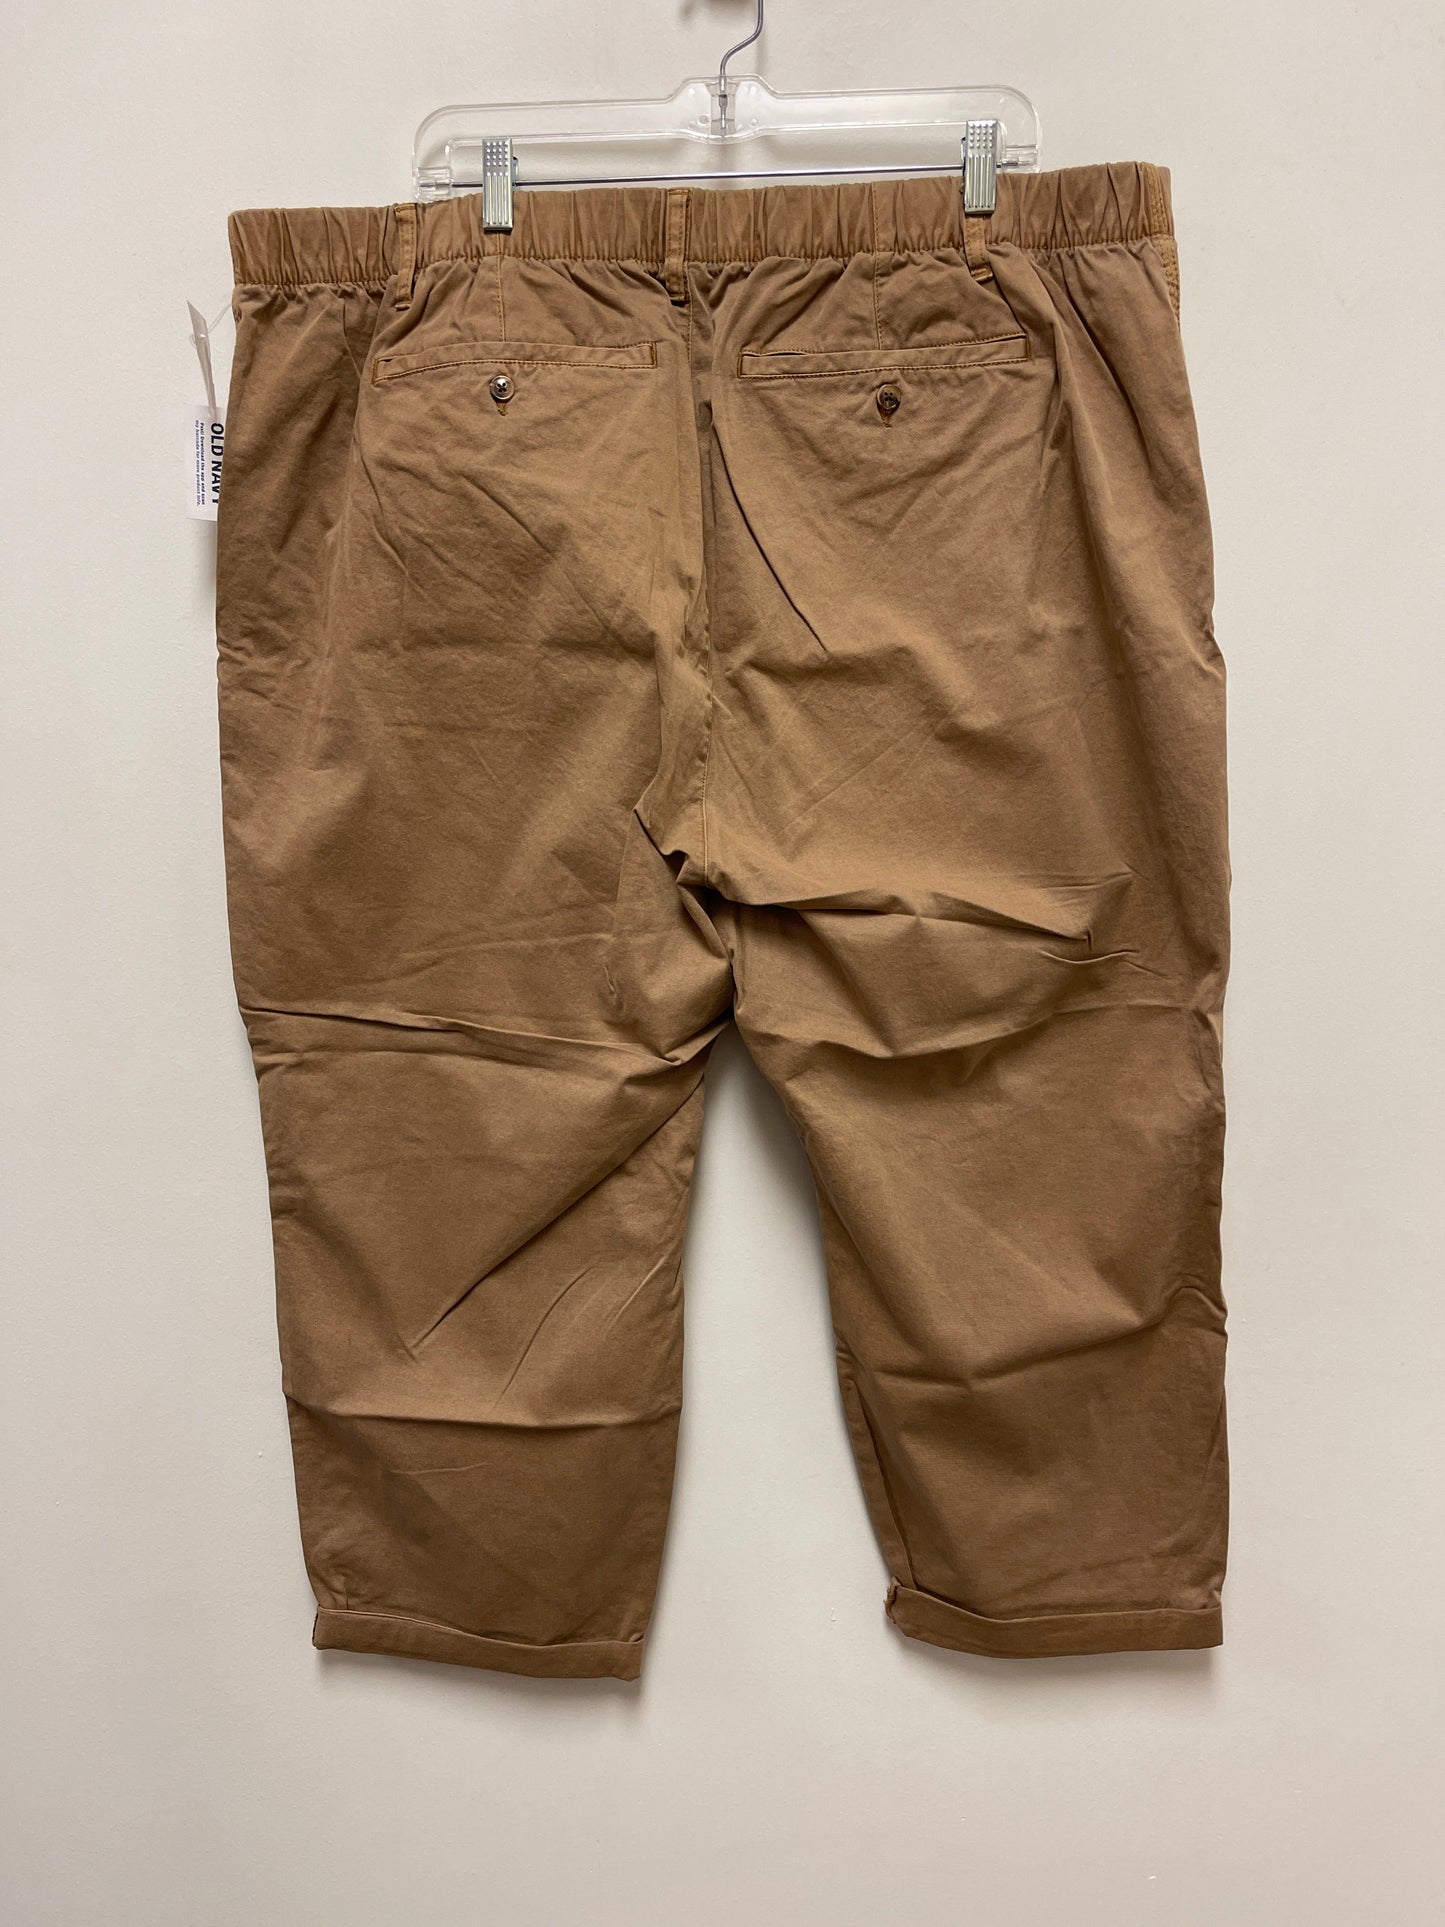 Brown Pants Chinos & Khakis Old Navy, Size 3x